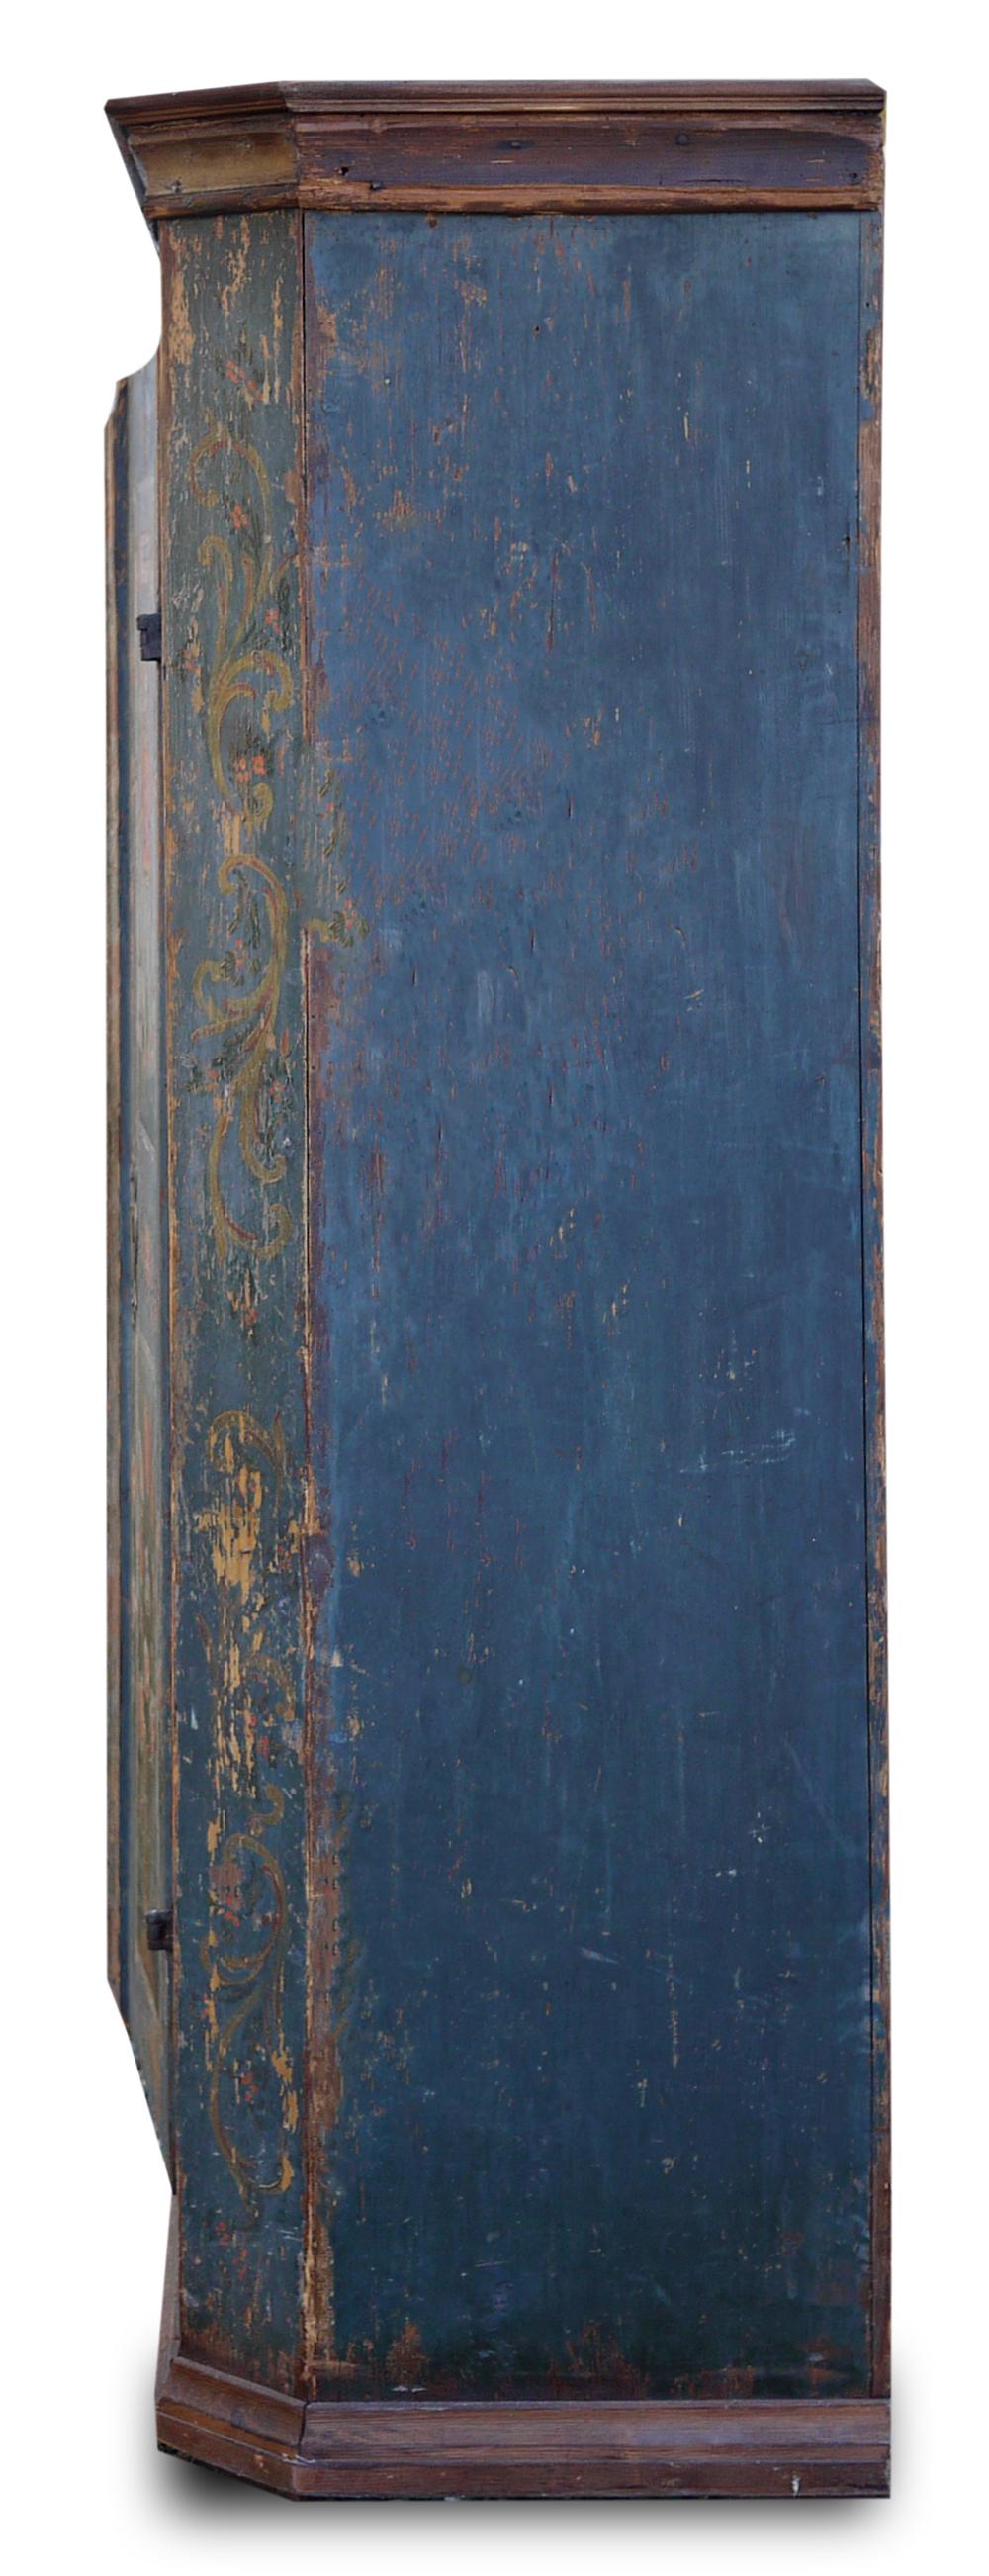 Tyrolean blue painted wardrobe

Measures: H 166 cm, L 100 cm, P 40 cm

Tyrolean painted wardrobe with two doors, entirely painted blue.

Floral motifs are distributed over the entire surface together with ramages, especially on the sides. The